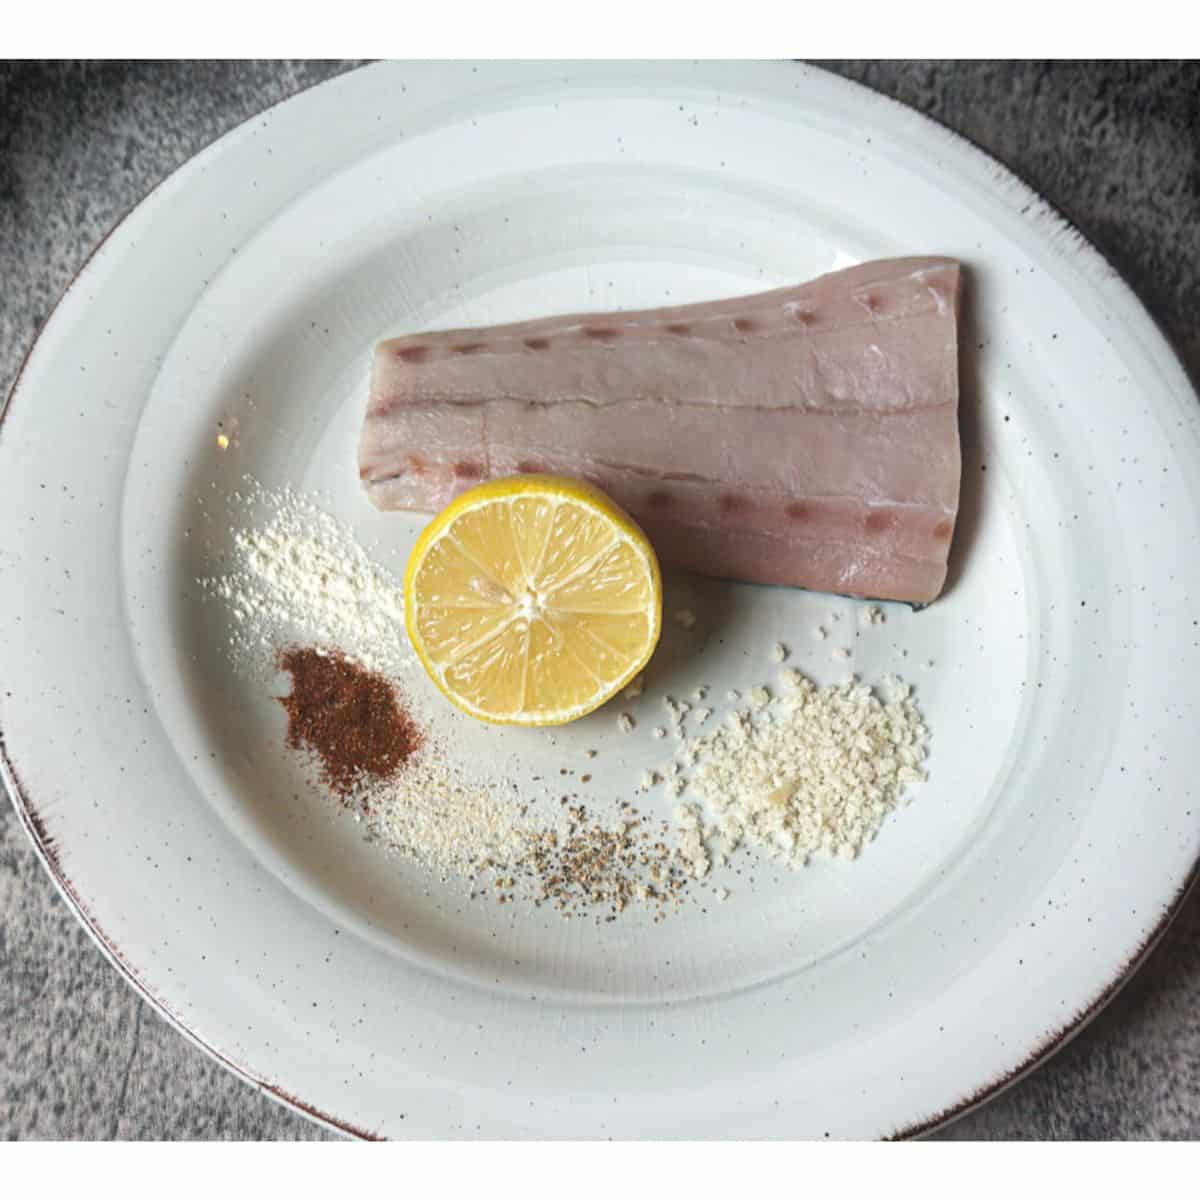 A photo representing most of the ingredients for air fryer Mahi Mahi on a plate with a Mahi Mahi fillet portion, half of a lemon, and 5 small piles of different spices, including the panko bread crumbs.